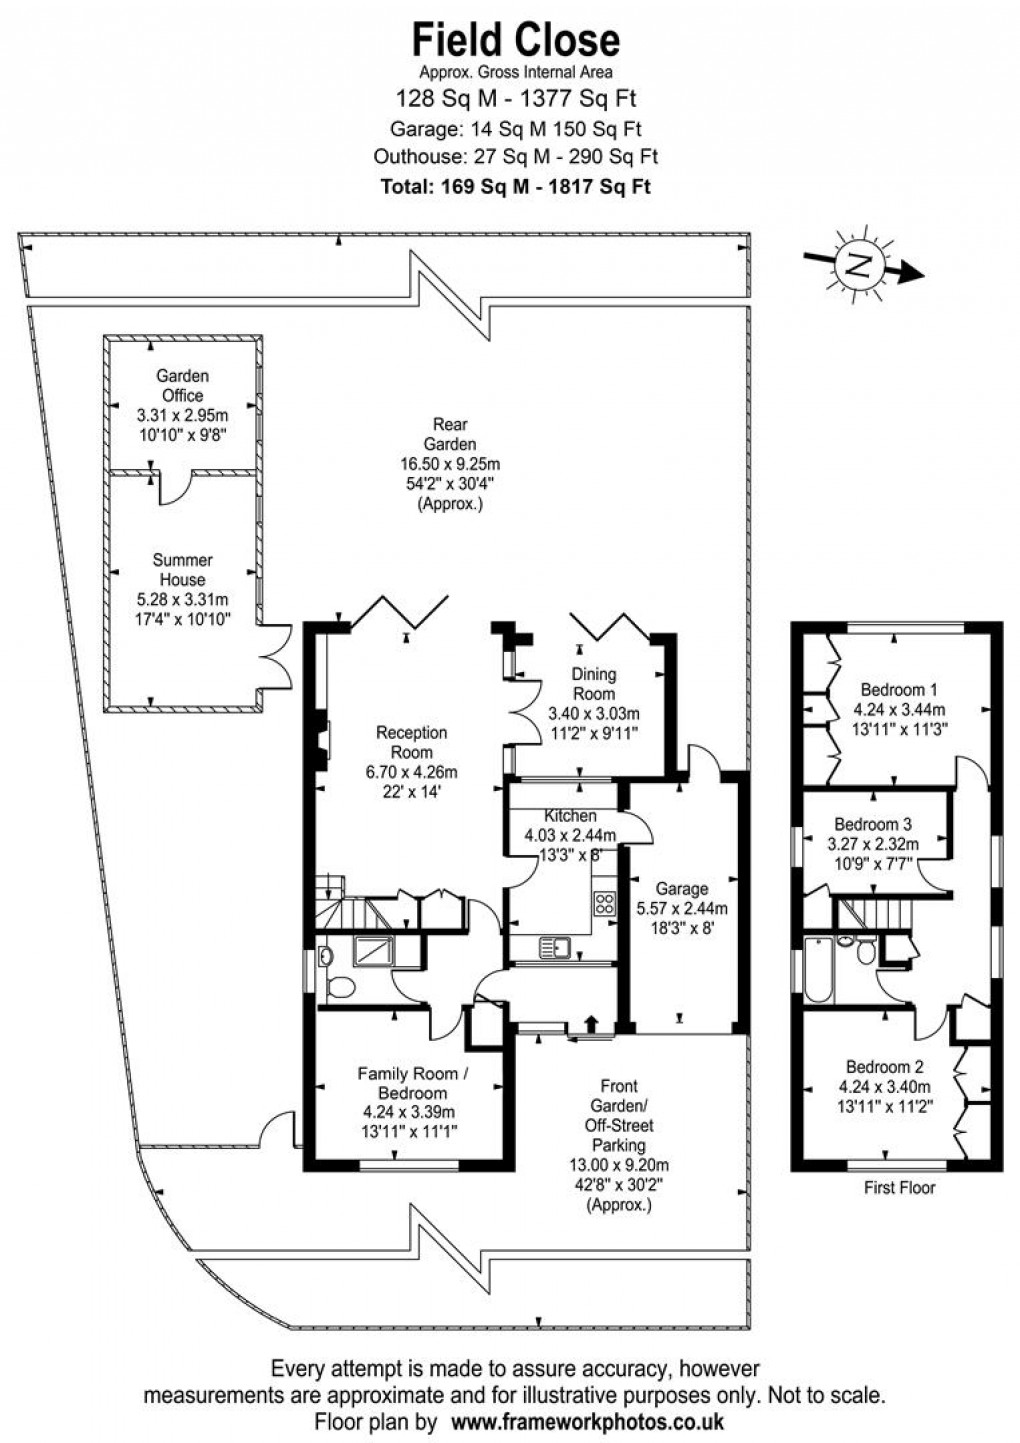 Floorplan for Field Close, West Molesey